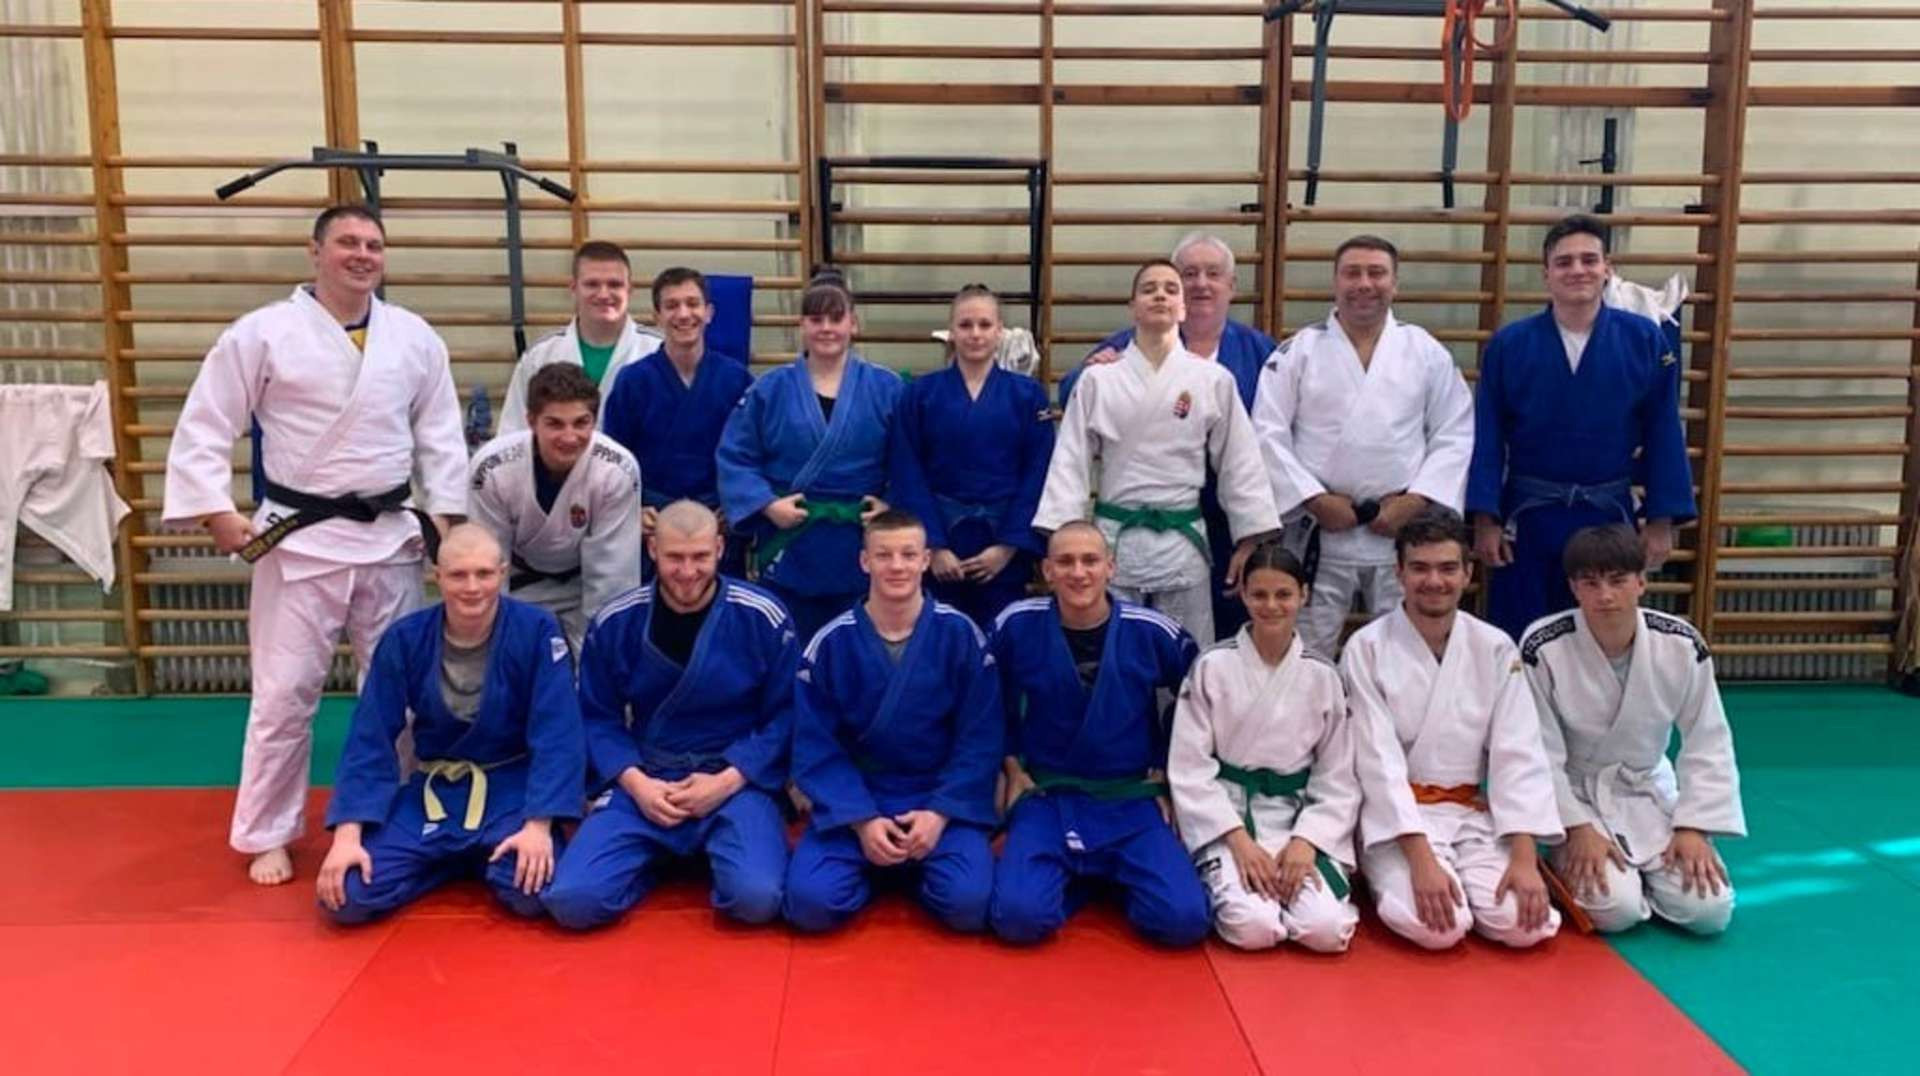 The young judoka and coaches have been in judo training since arriving in Hungary ©IJF